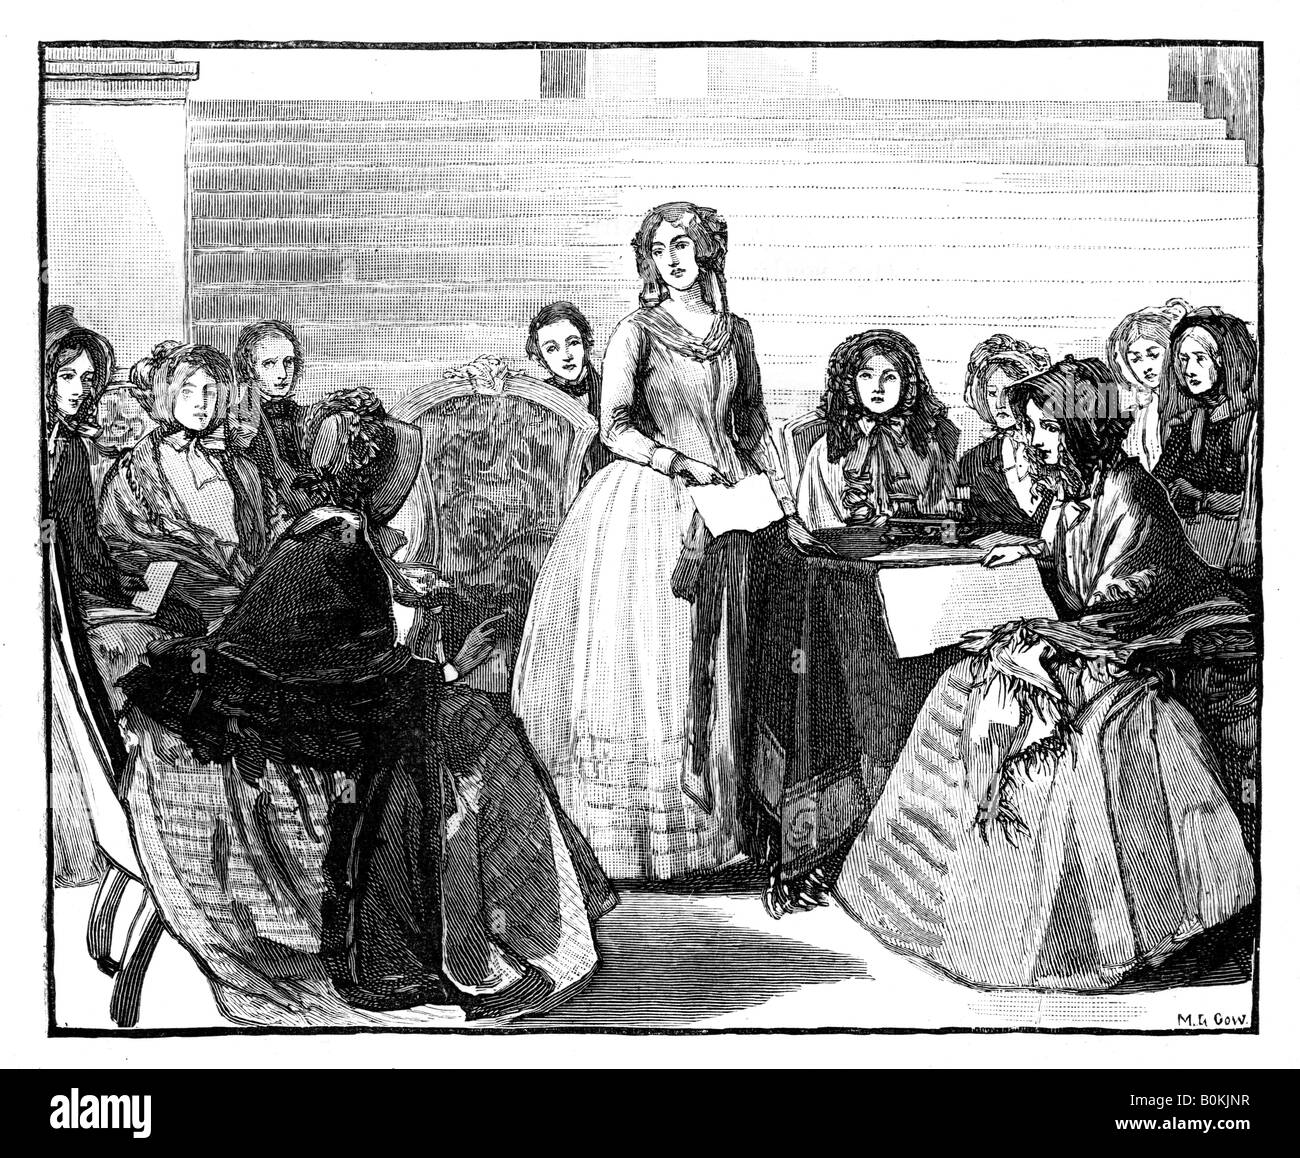 Meeting of the Ladies' Committee at Stafford House, mid-late 19th century, (1888).Artist: M G Gow Stock Photo